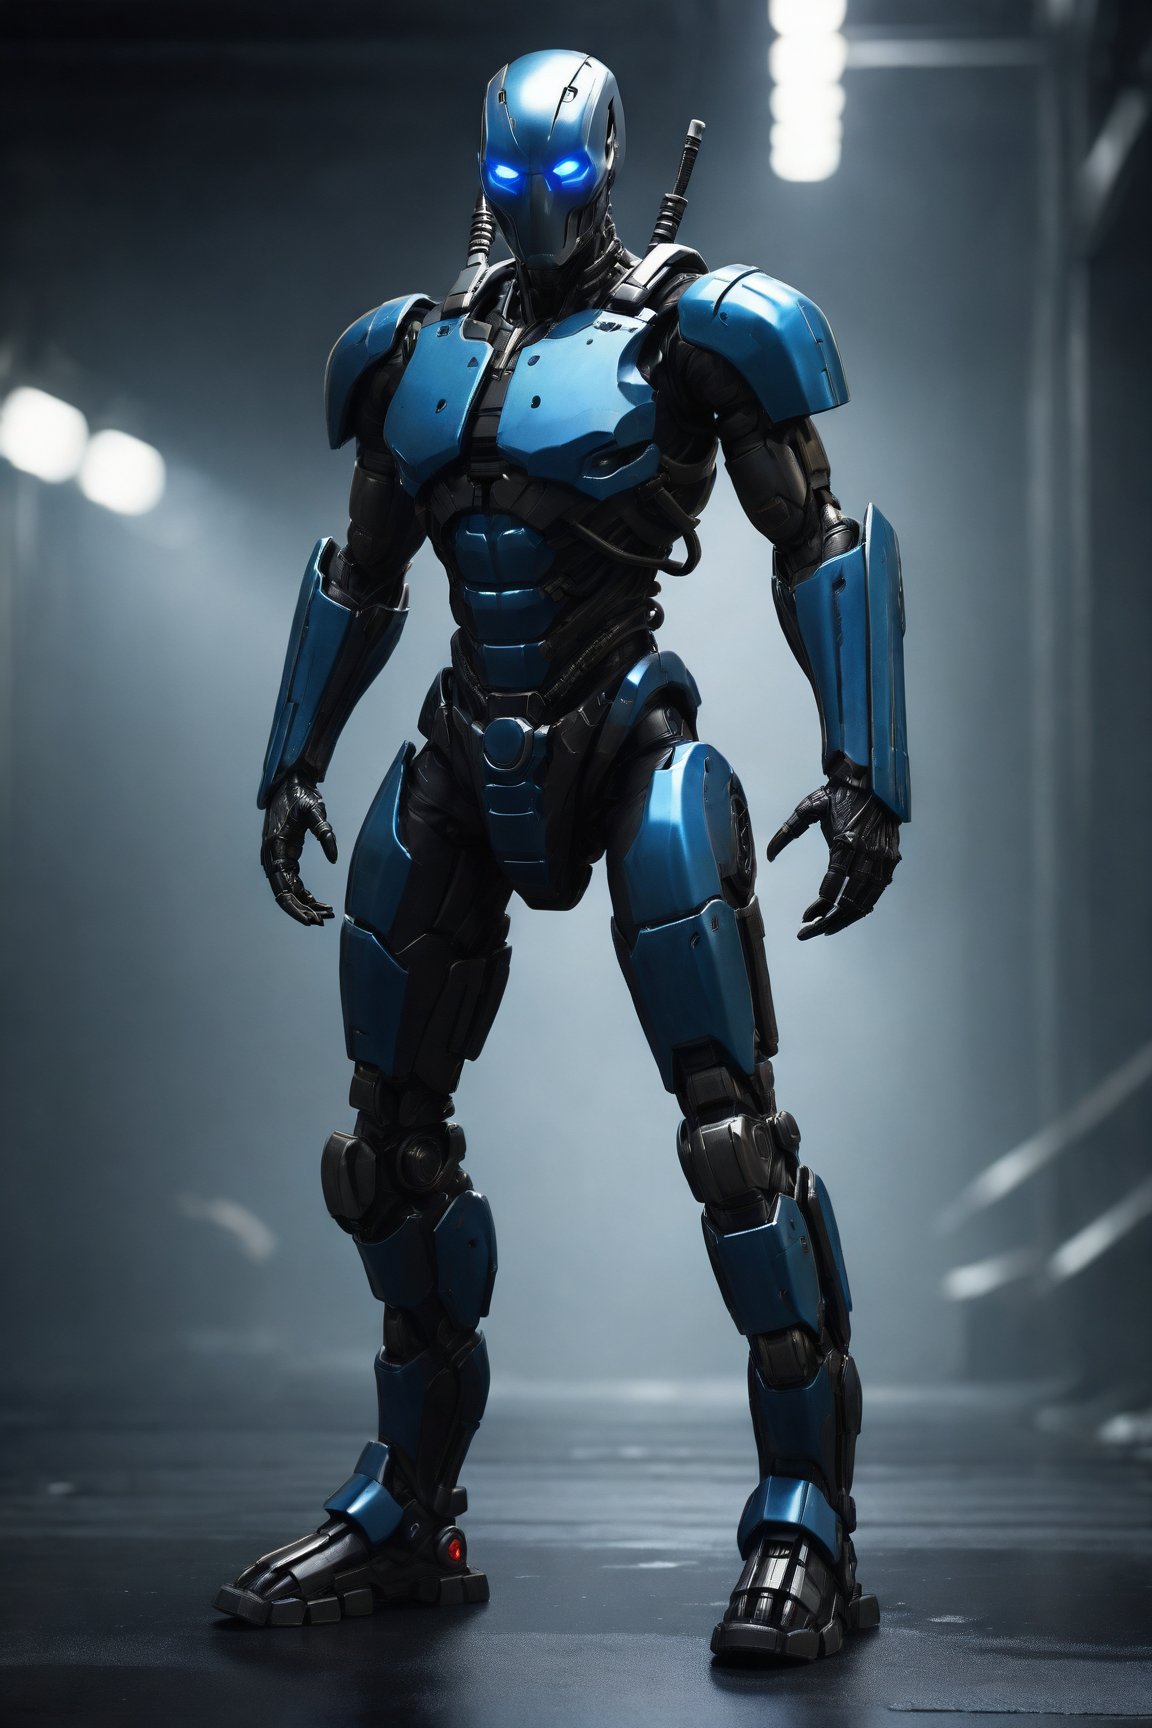 By zer0pixels, ((create a detailed character sheet for the character Deadpool in a Police uniform)), ((wearing a dark hooded cloak)) and ((mask that covers the lower half of their face)). ((Cybernetic augmentations on their arms and legs)). ((Holding a plasma dagger in their hand)). ((The dagger emits a faint blue glow that contrasts)), ((photorealistic style)), ((Sketch book style)), ((hand drawn)), ((realistic sketch)), ((bounty hunter wanted)), ((UI bio statistic)), ((dreamlike motion, subtle colors)), ((full-body zoomed)), ((rule of thirds:2)), ((perfect composition golden ratio, live 3D)), (masterpiece), ((highest quality)), ((sharp focus)), ((better hand)), ((perfect anatomy)), ((highly detailed)), ((high resolution)).

